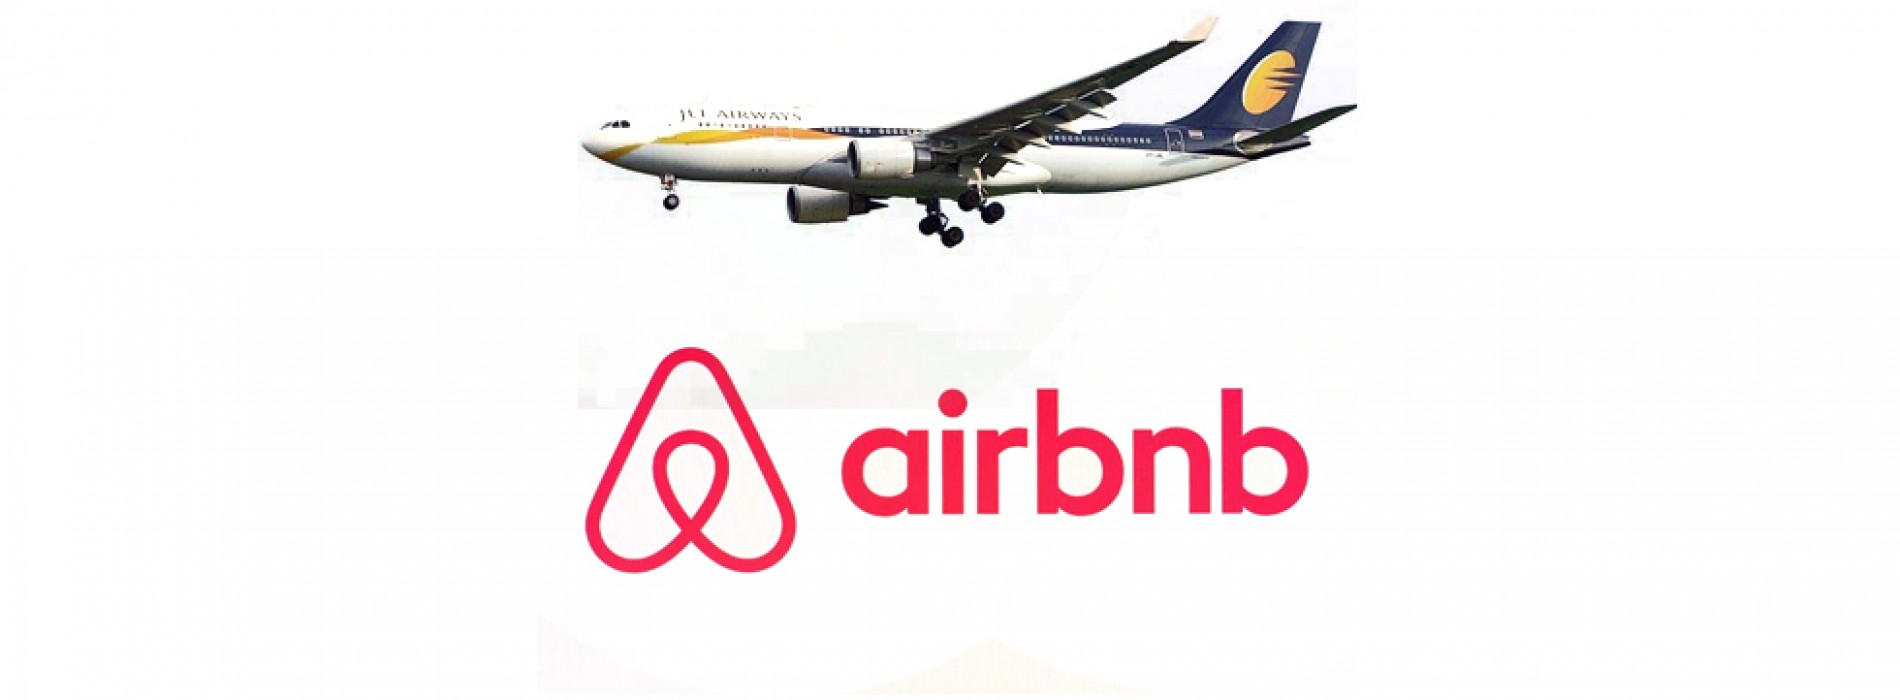 Airbnb announces its first airline partnership in India with Jet Airways